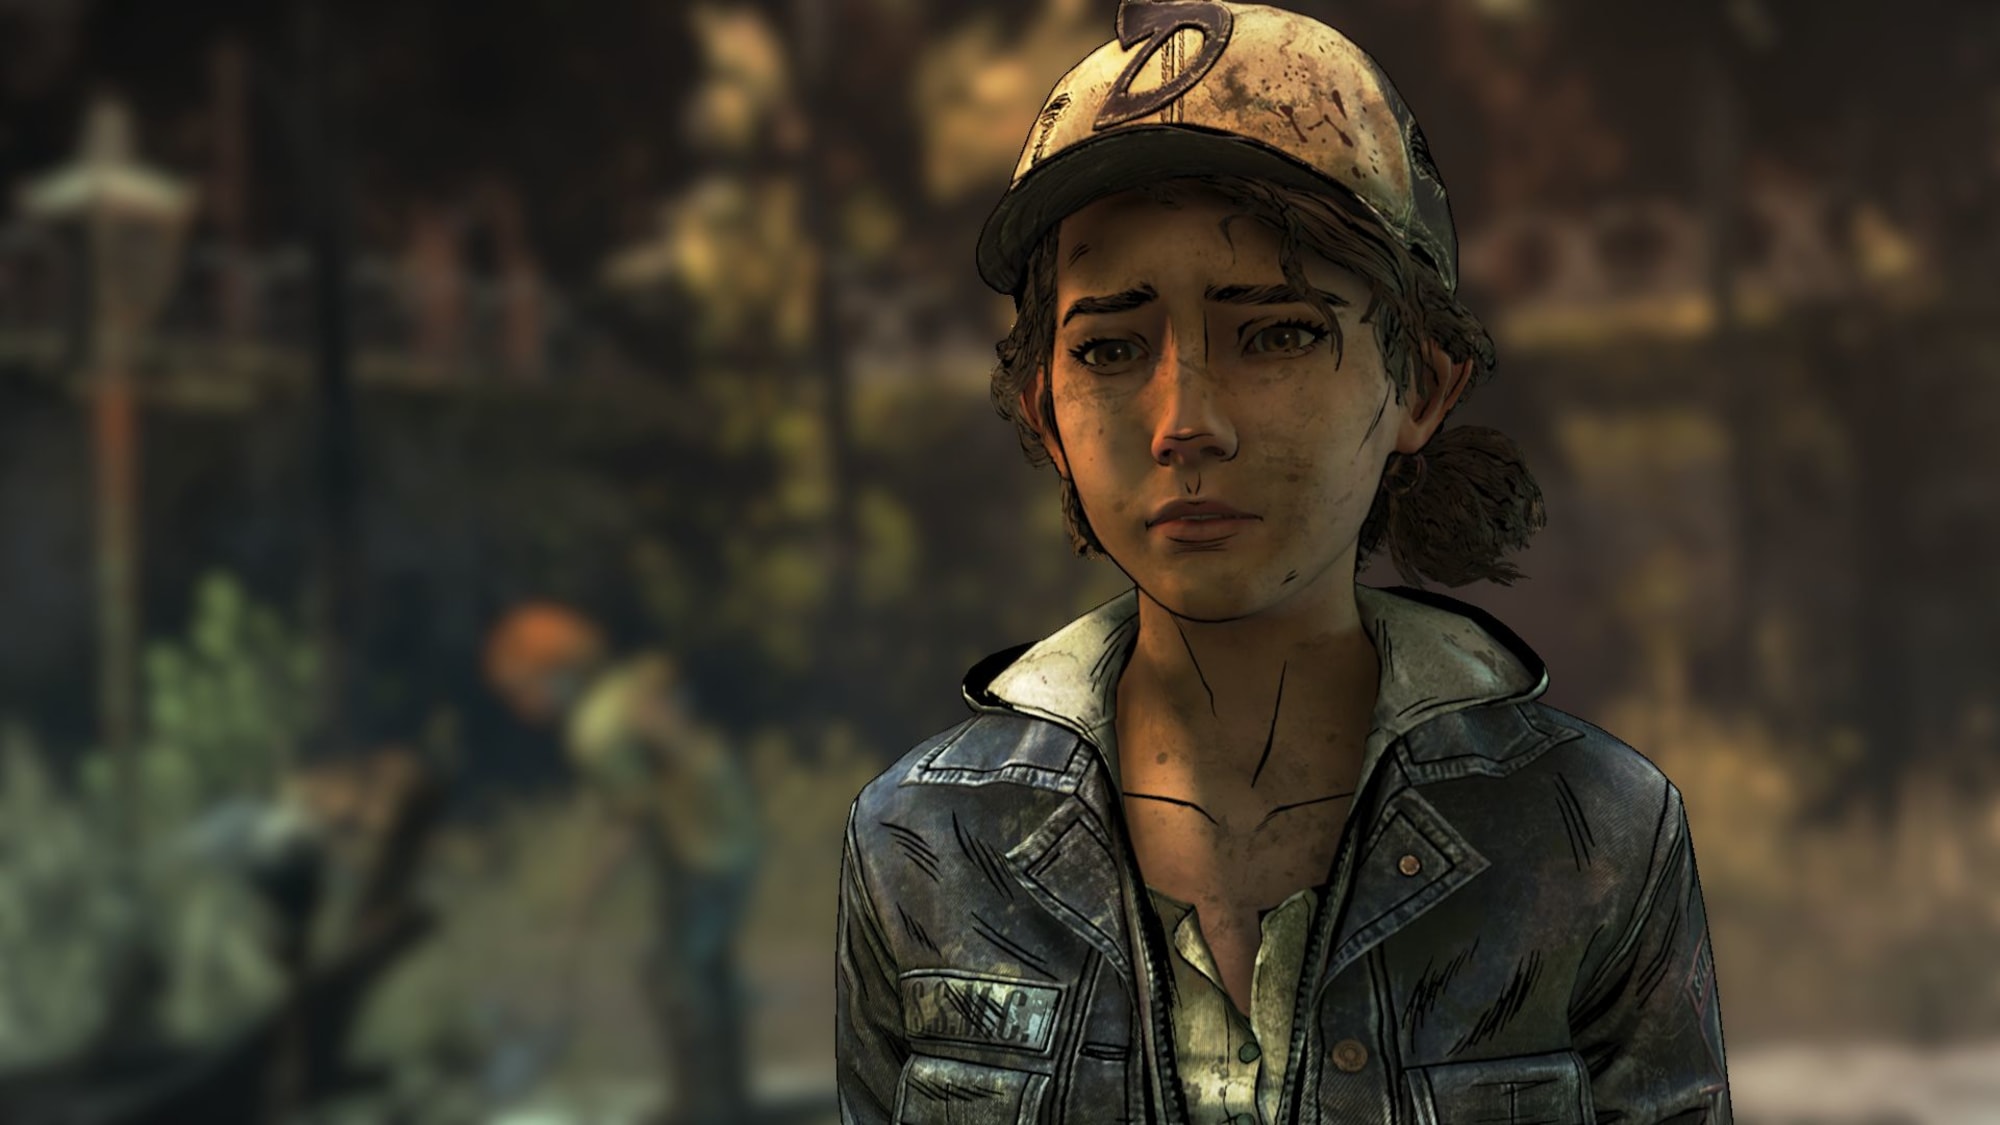 The Walking Dead: The Final Season concludes on March 26